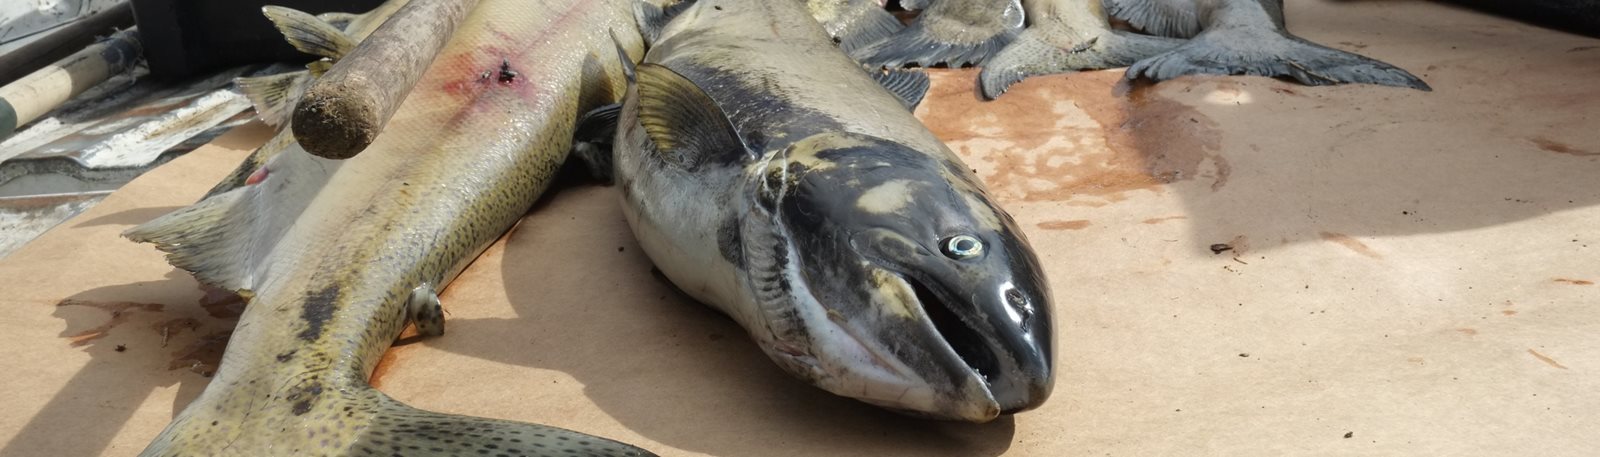 Salmon that have died in Washington's Wallace River before spawning. Source: Howard Hsu